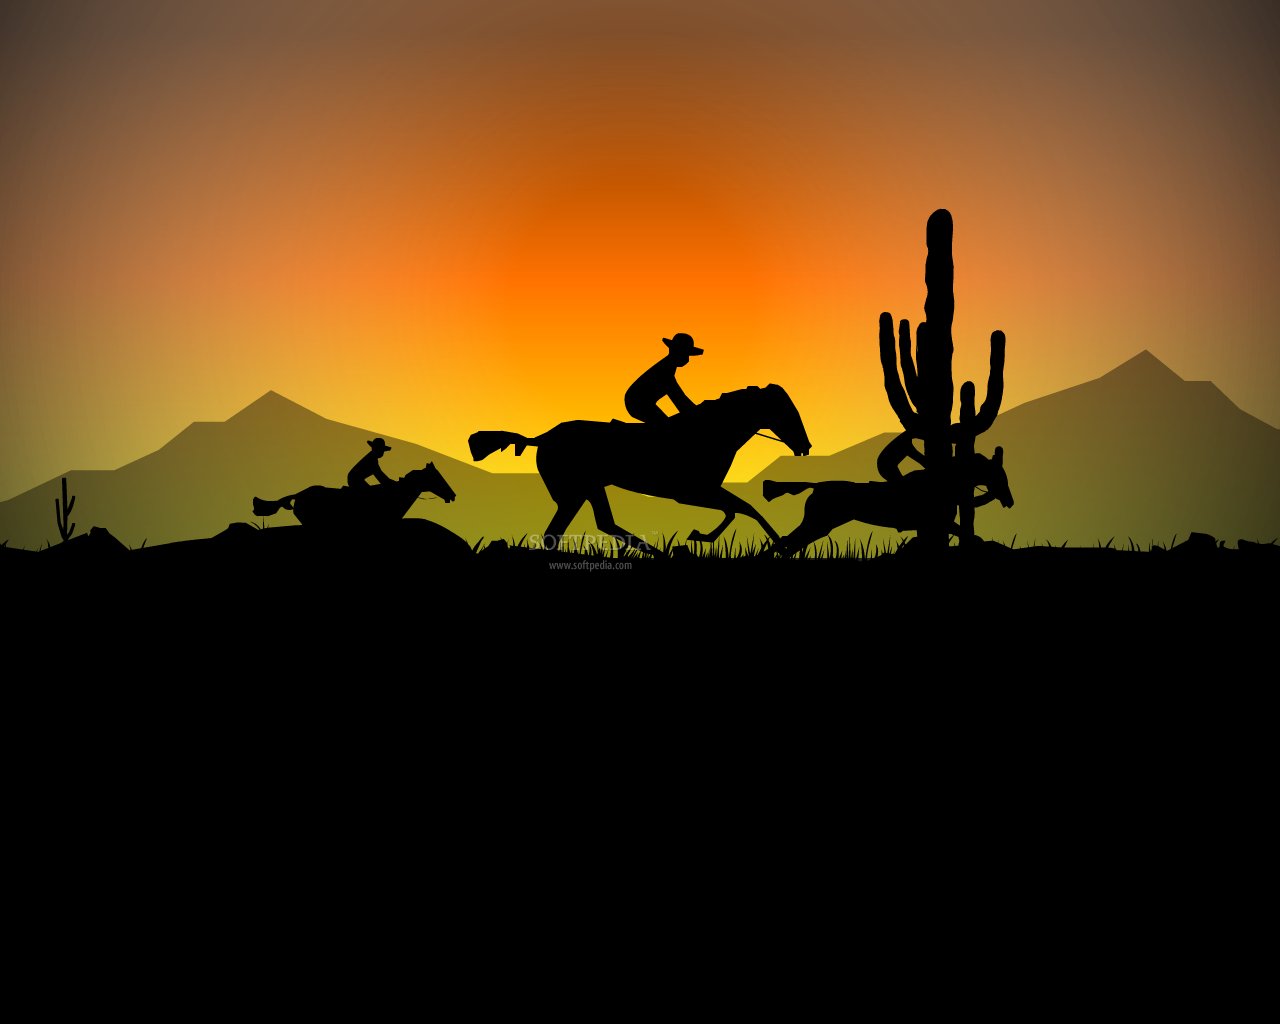 Cowboy Ride Screensaver   This is how your desktop will look like